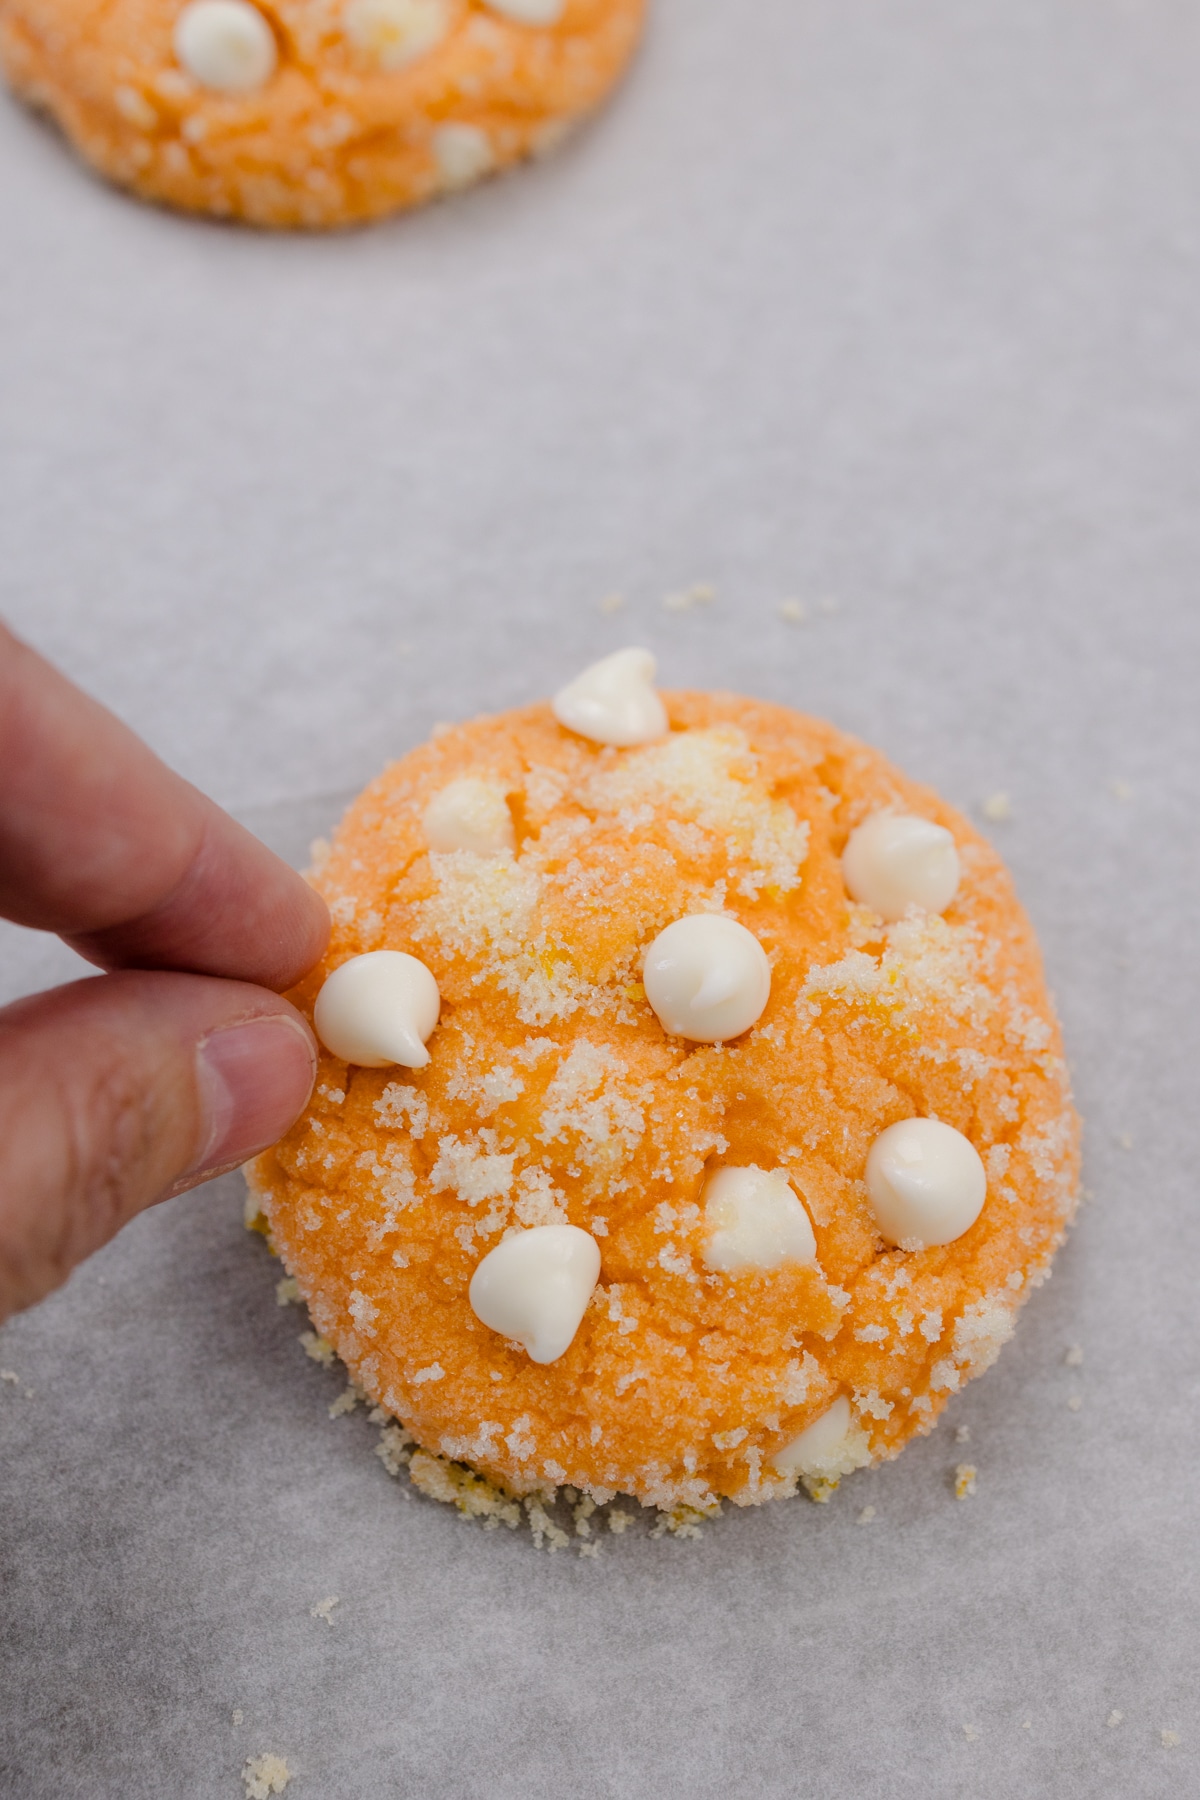 Close up of an orange creamsicle cookie with extra chocolate chips being added on top.